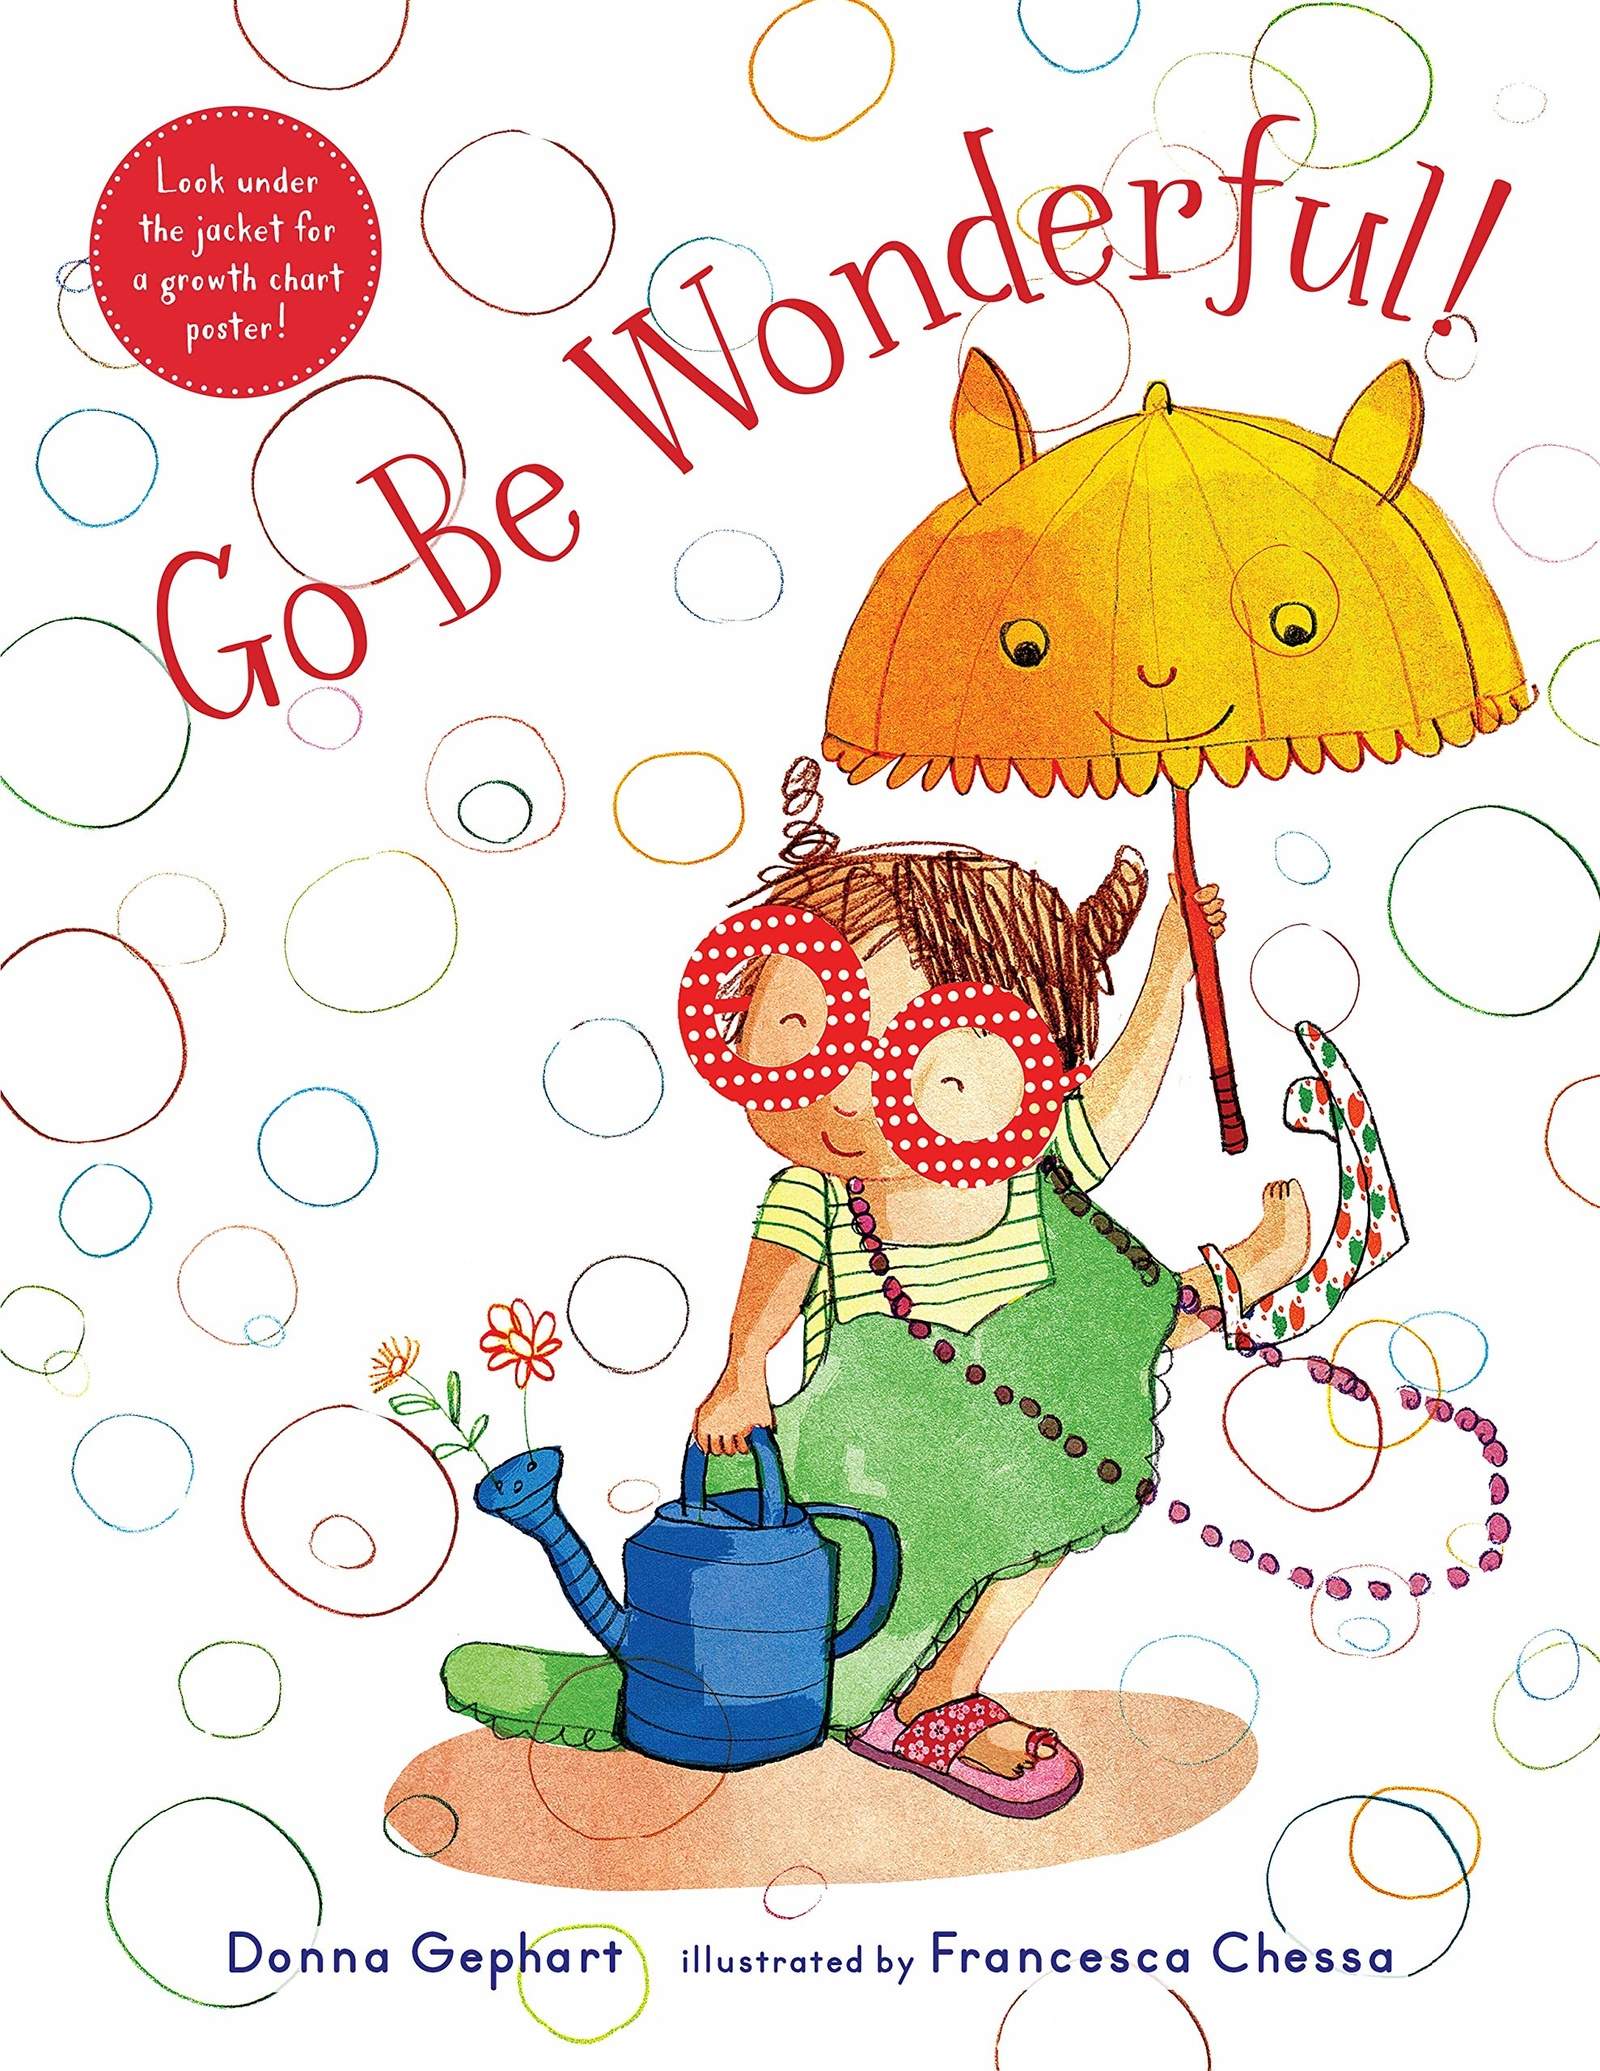 Written by Donna Gephart,  Go Be Wonderful, Illustrations,  Holiday House Books,  2021